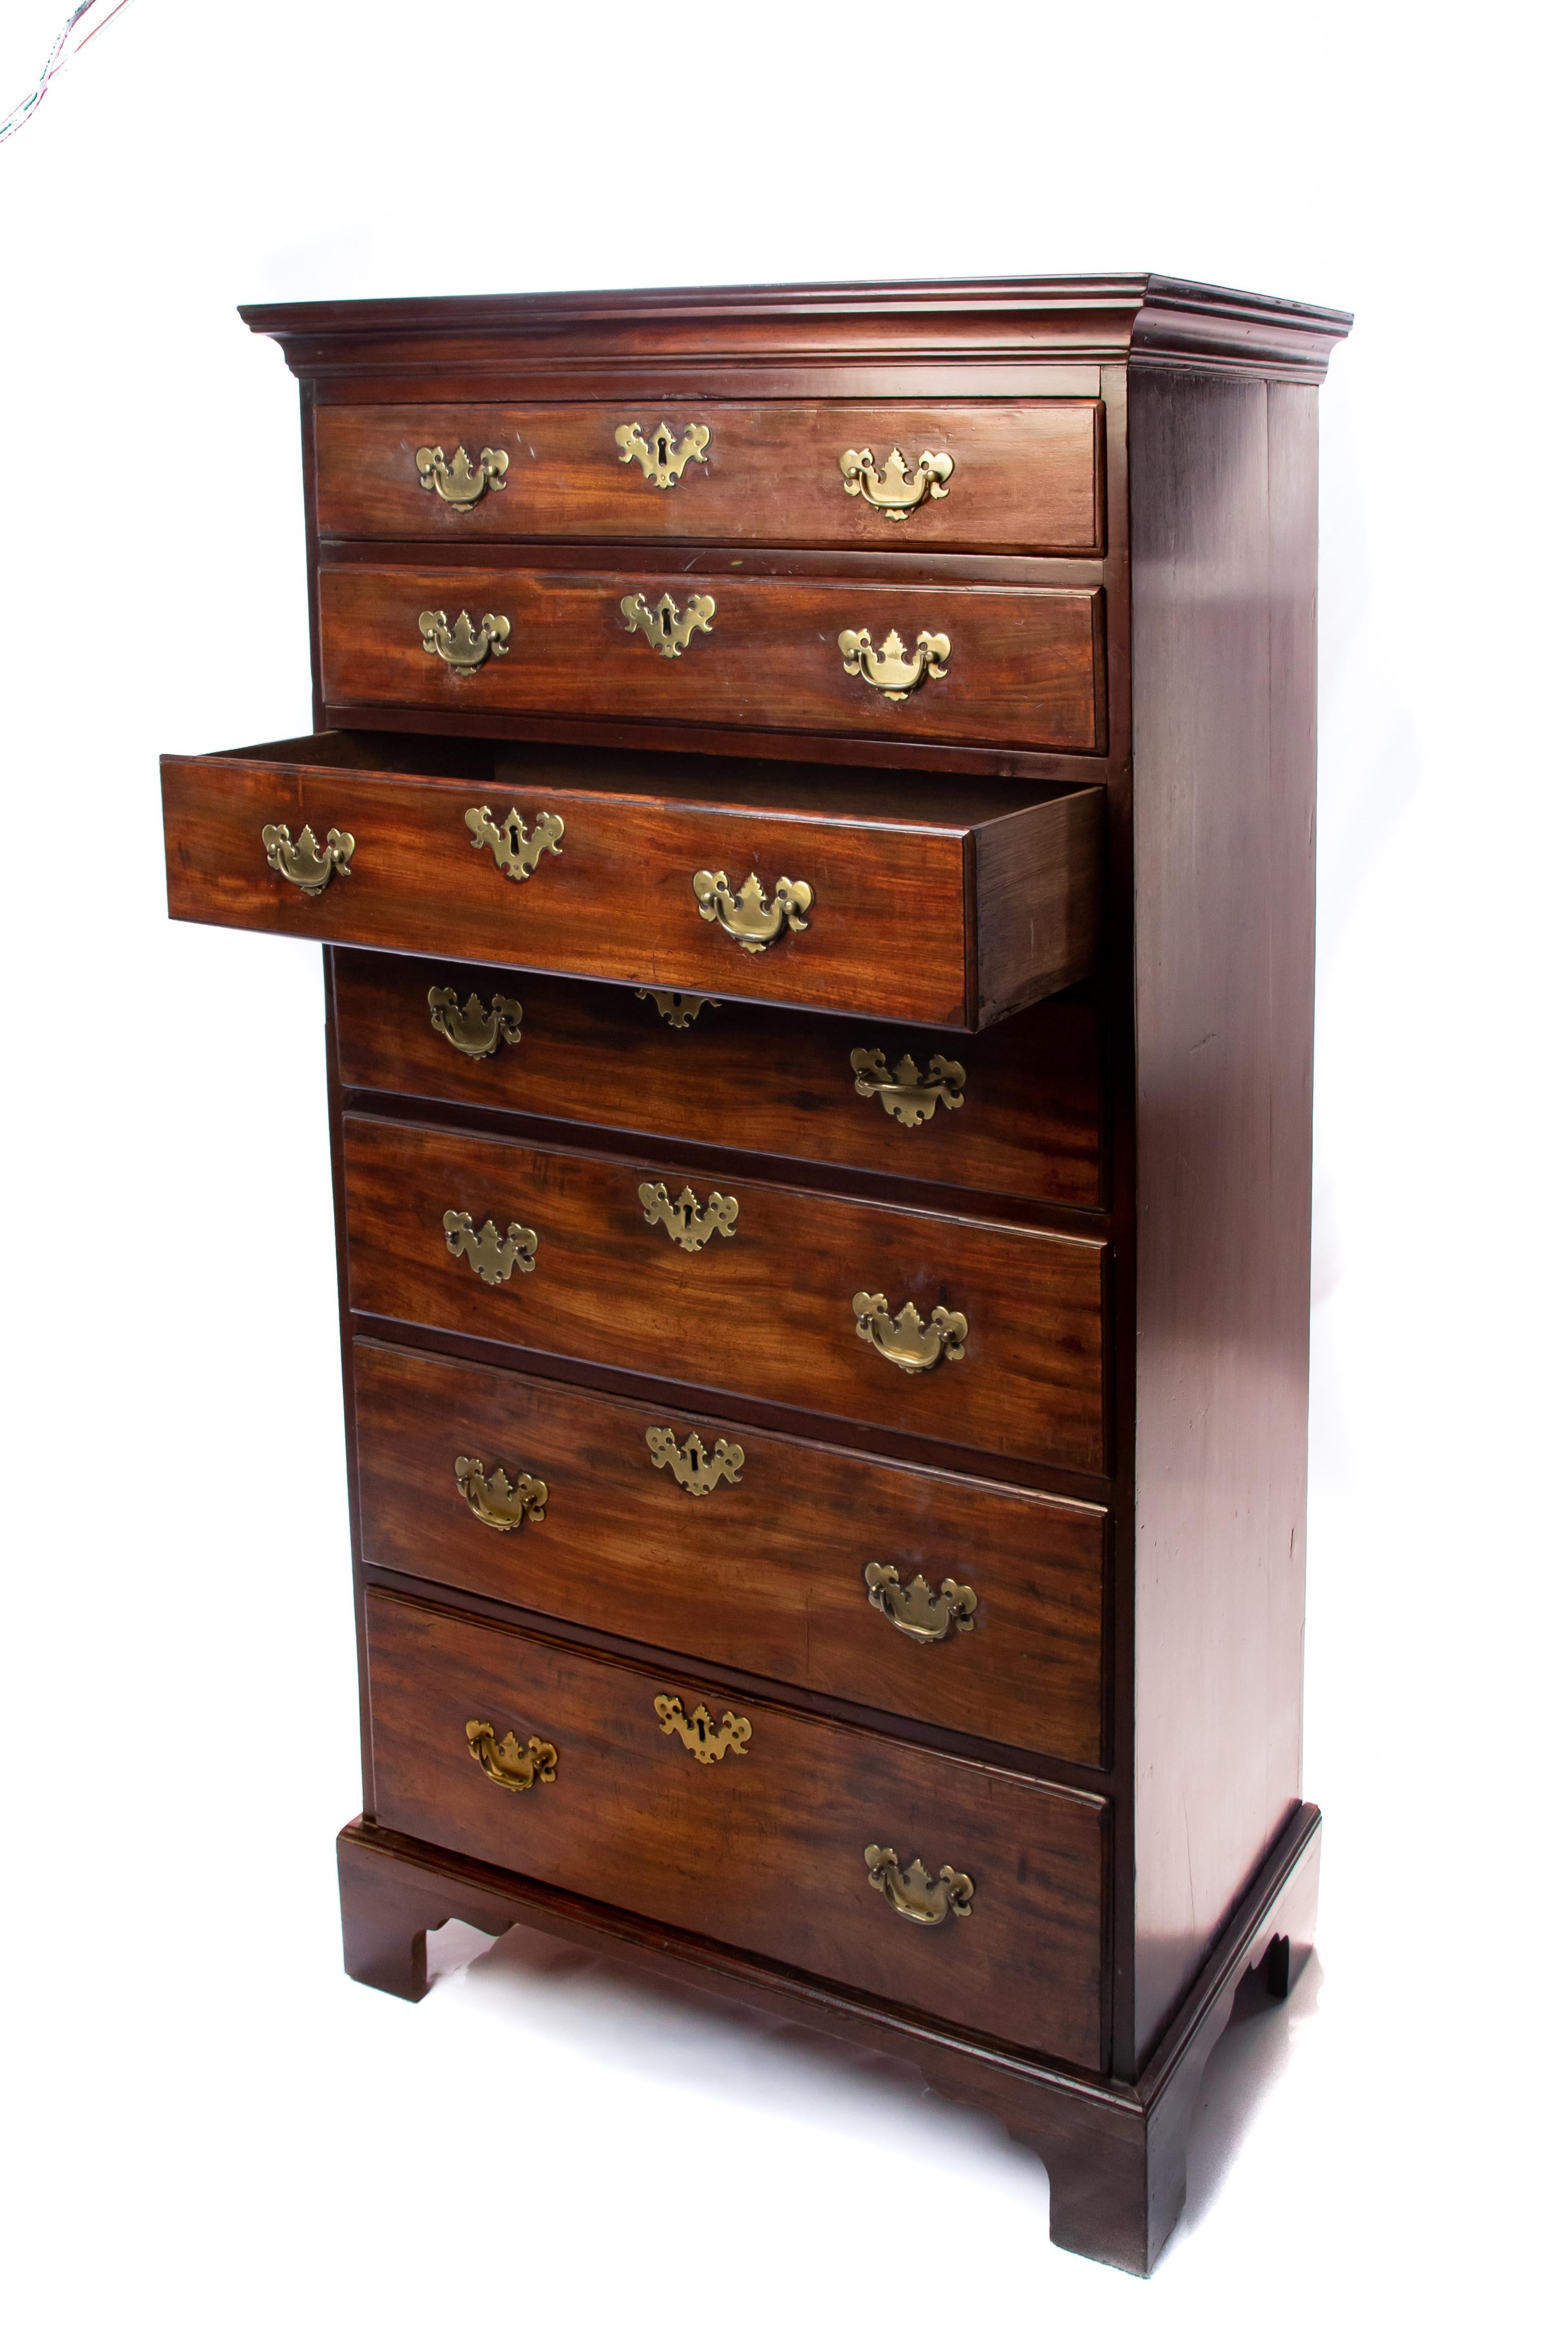 Offering this stunning tall chest in mahogany. Starting at the bottom on a bracket leg it rises. The narrow tall chest has seven drawers which have Chippendale pulls and hardware. The top of the chest finishes off beautifully with a dovetailed top